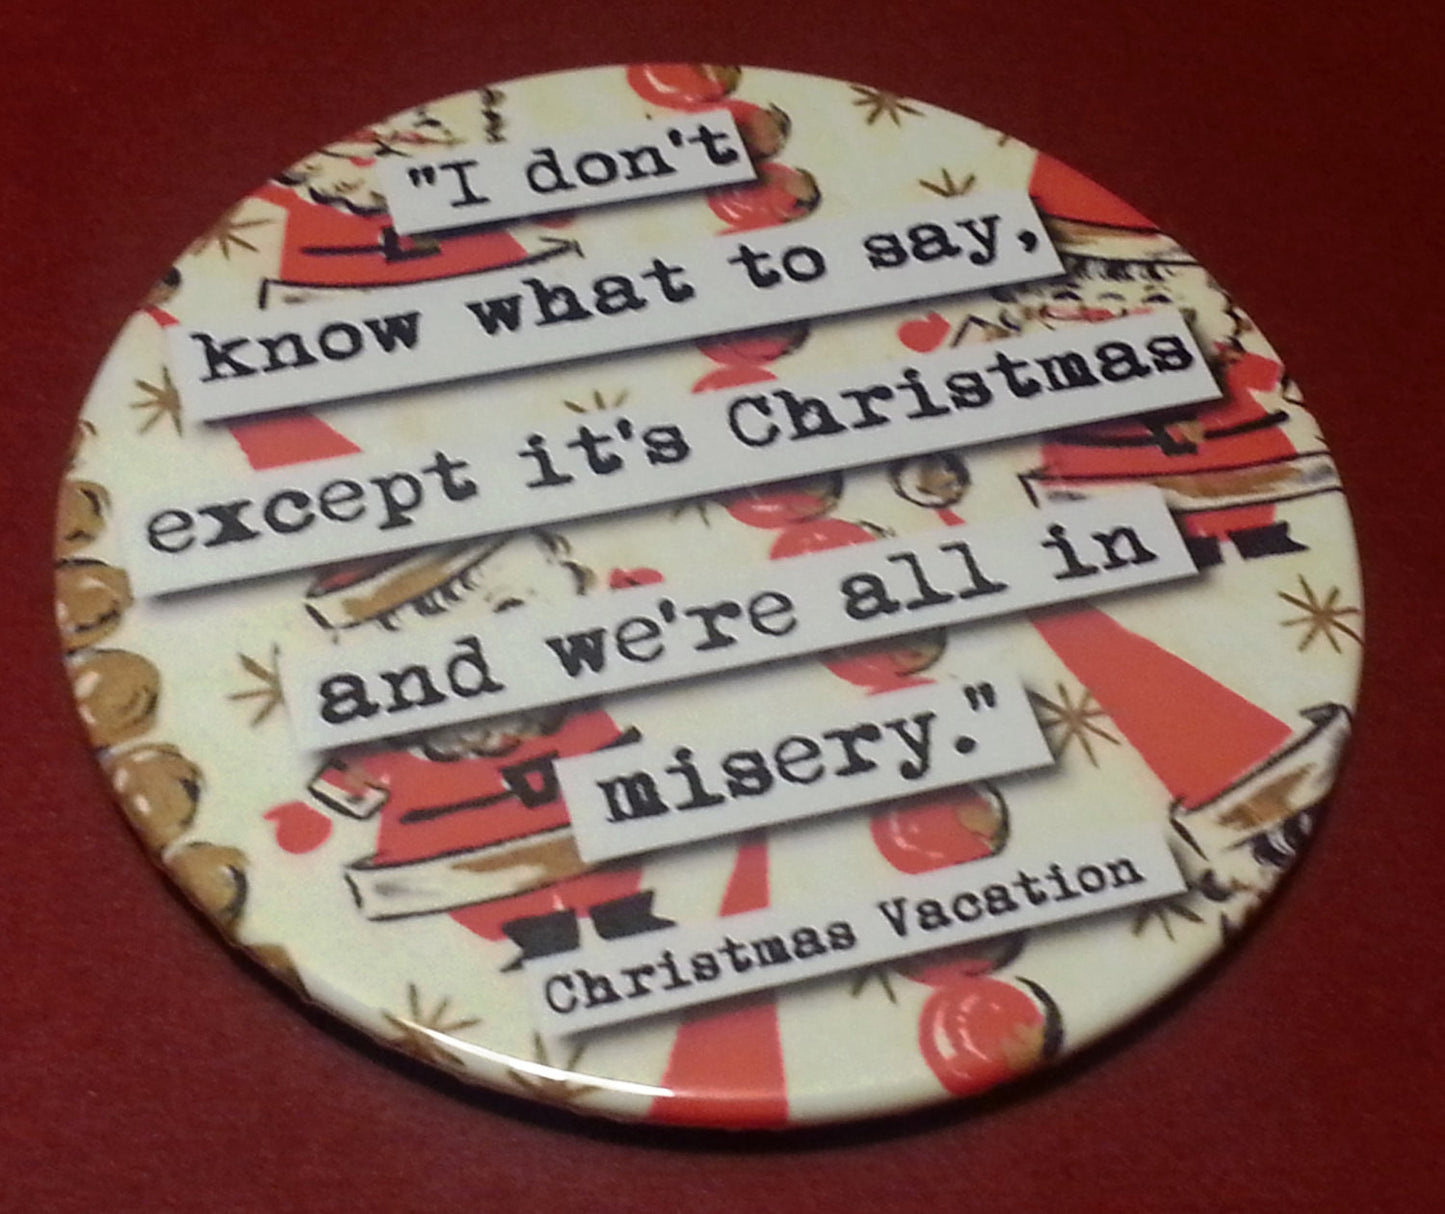 Christmas Vacation We're All in Misery Quote Coaster